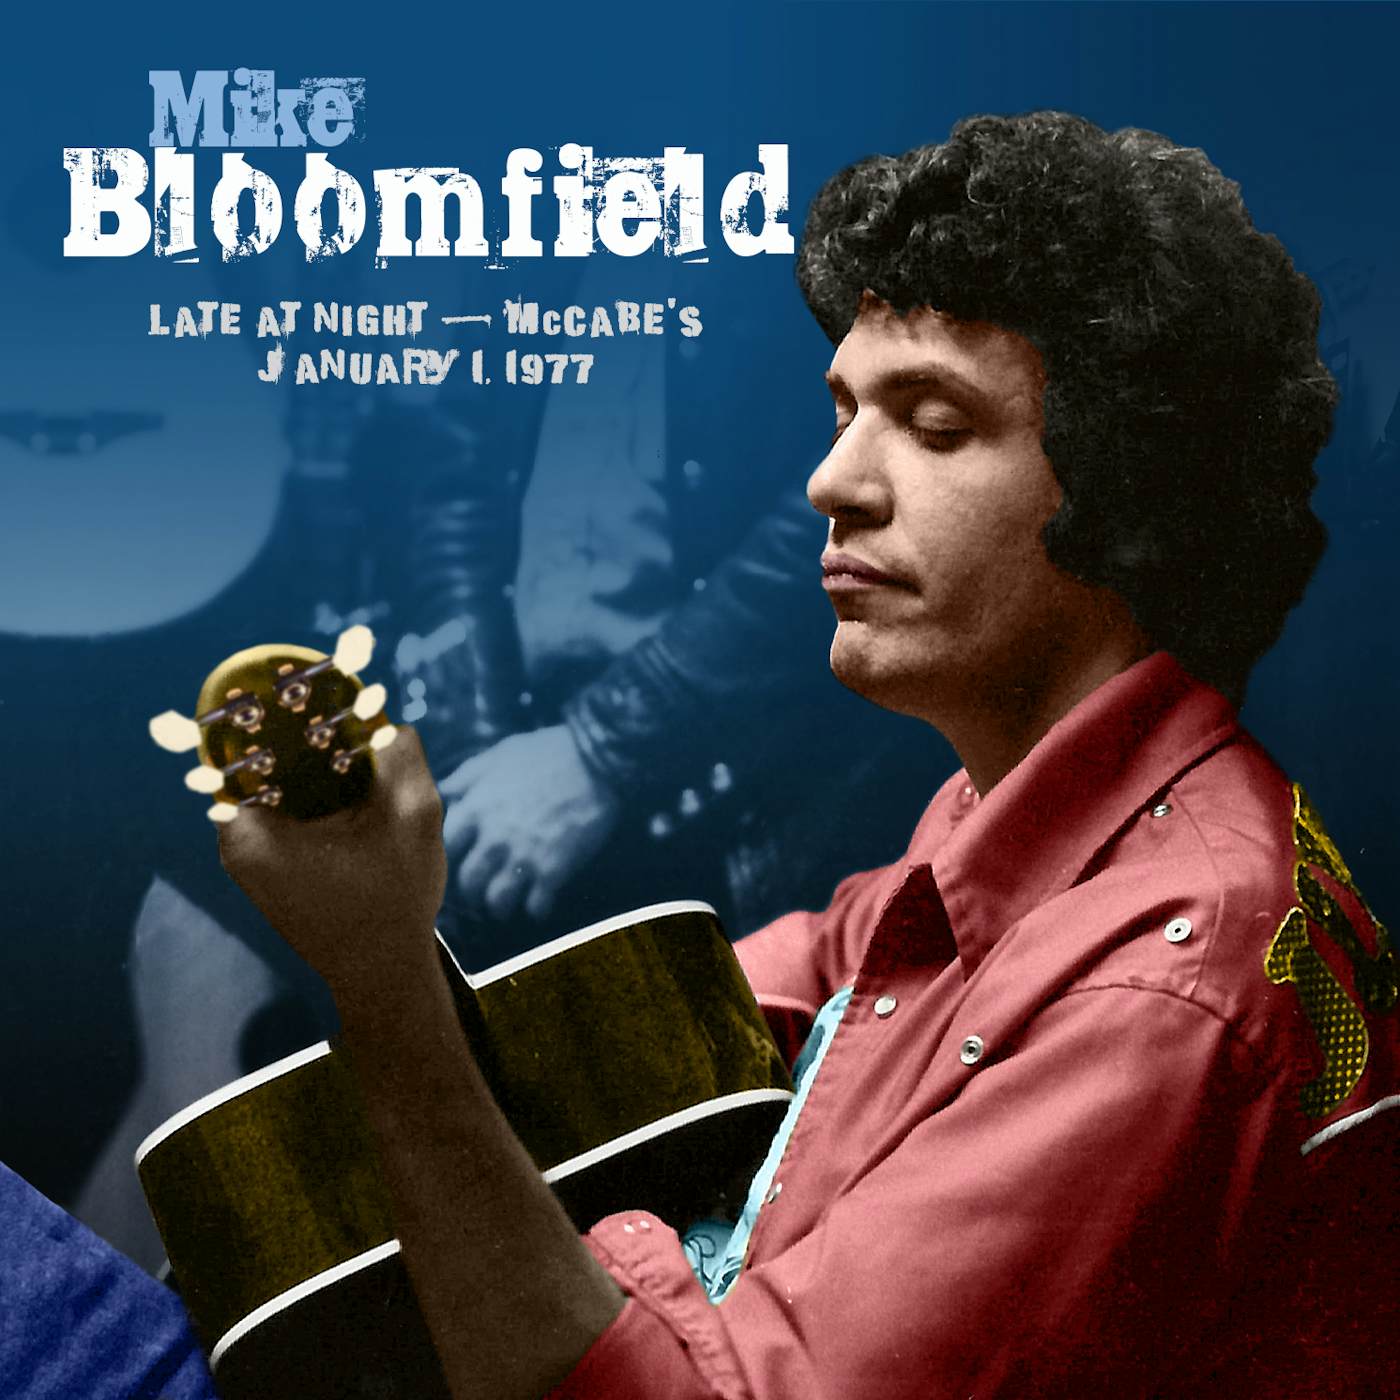 Mike Bloomfield LATE AT NIGHT: MCCABES JANUARY 1,1977 CD